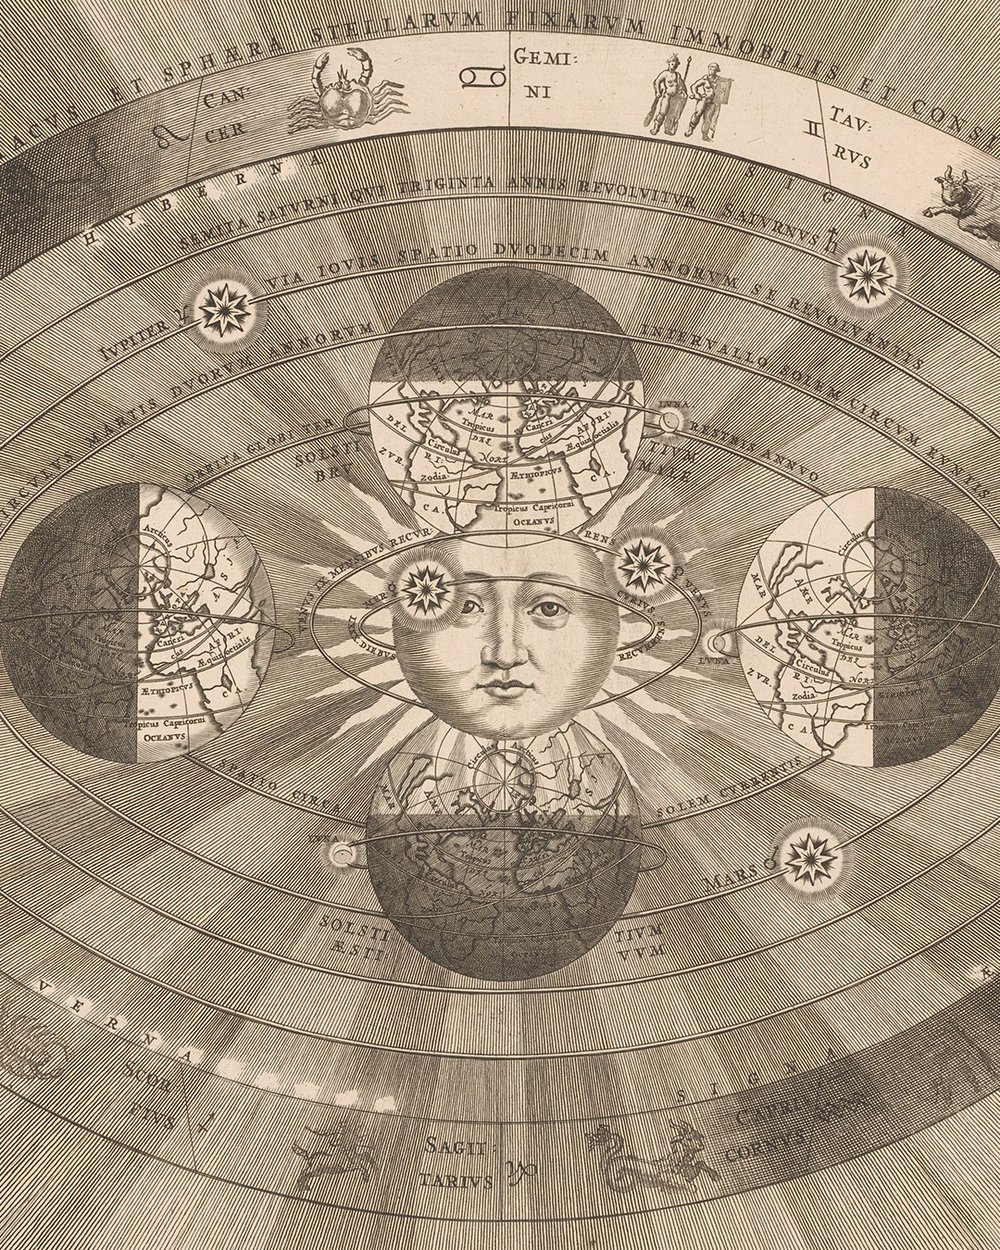 ''Sky map of the Copernicus system'' (1708)